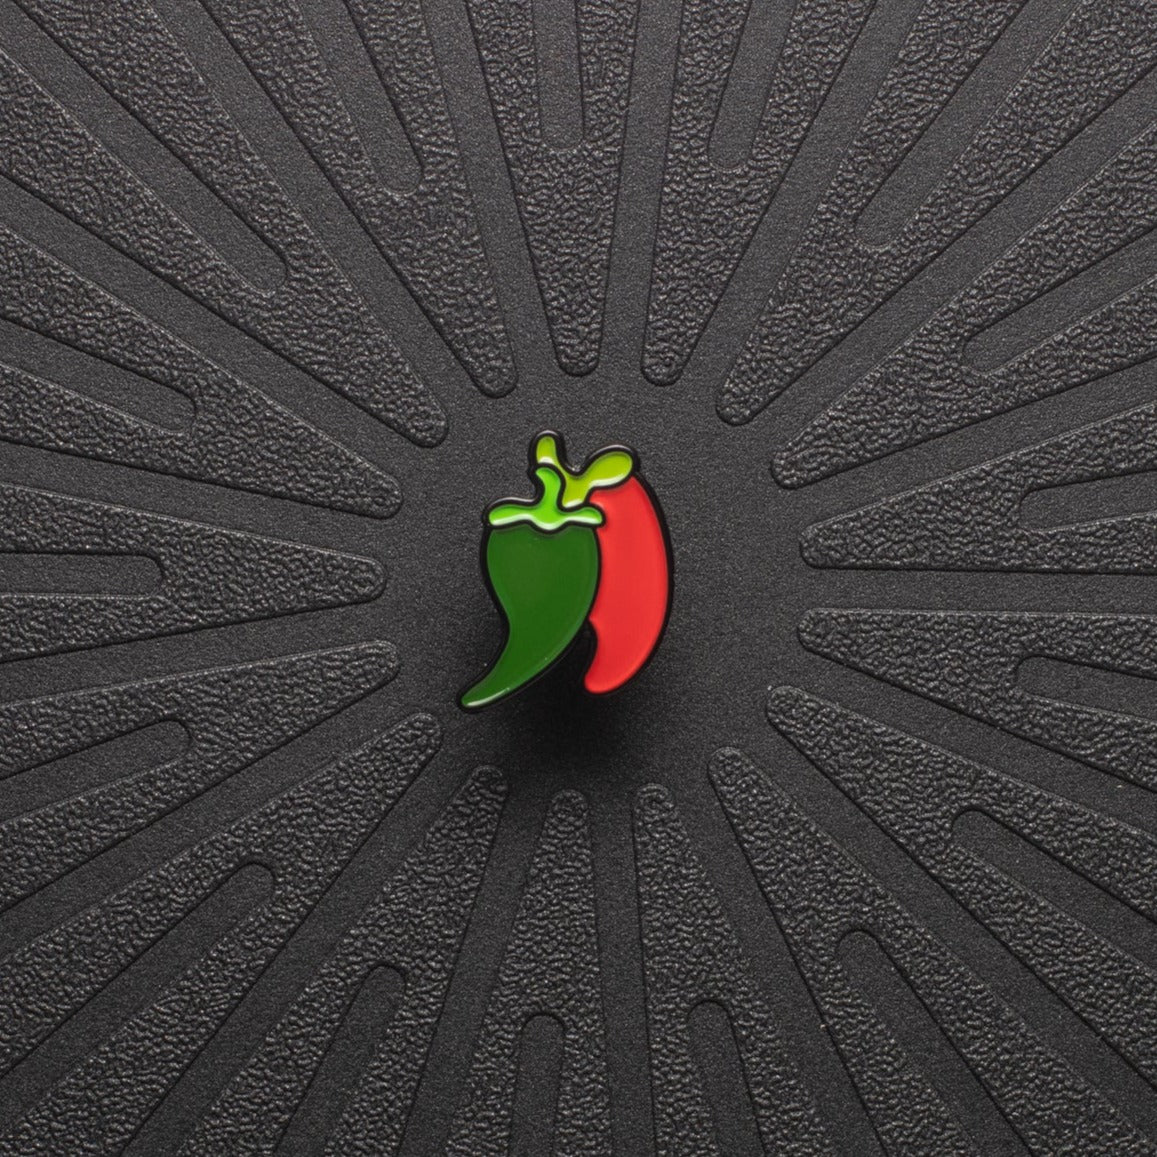 Chili Peppers Pins